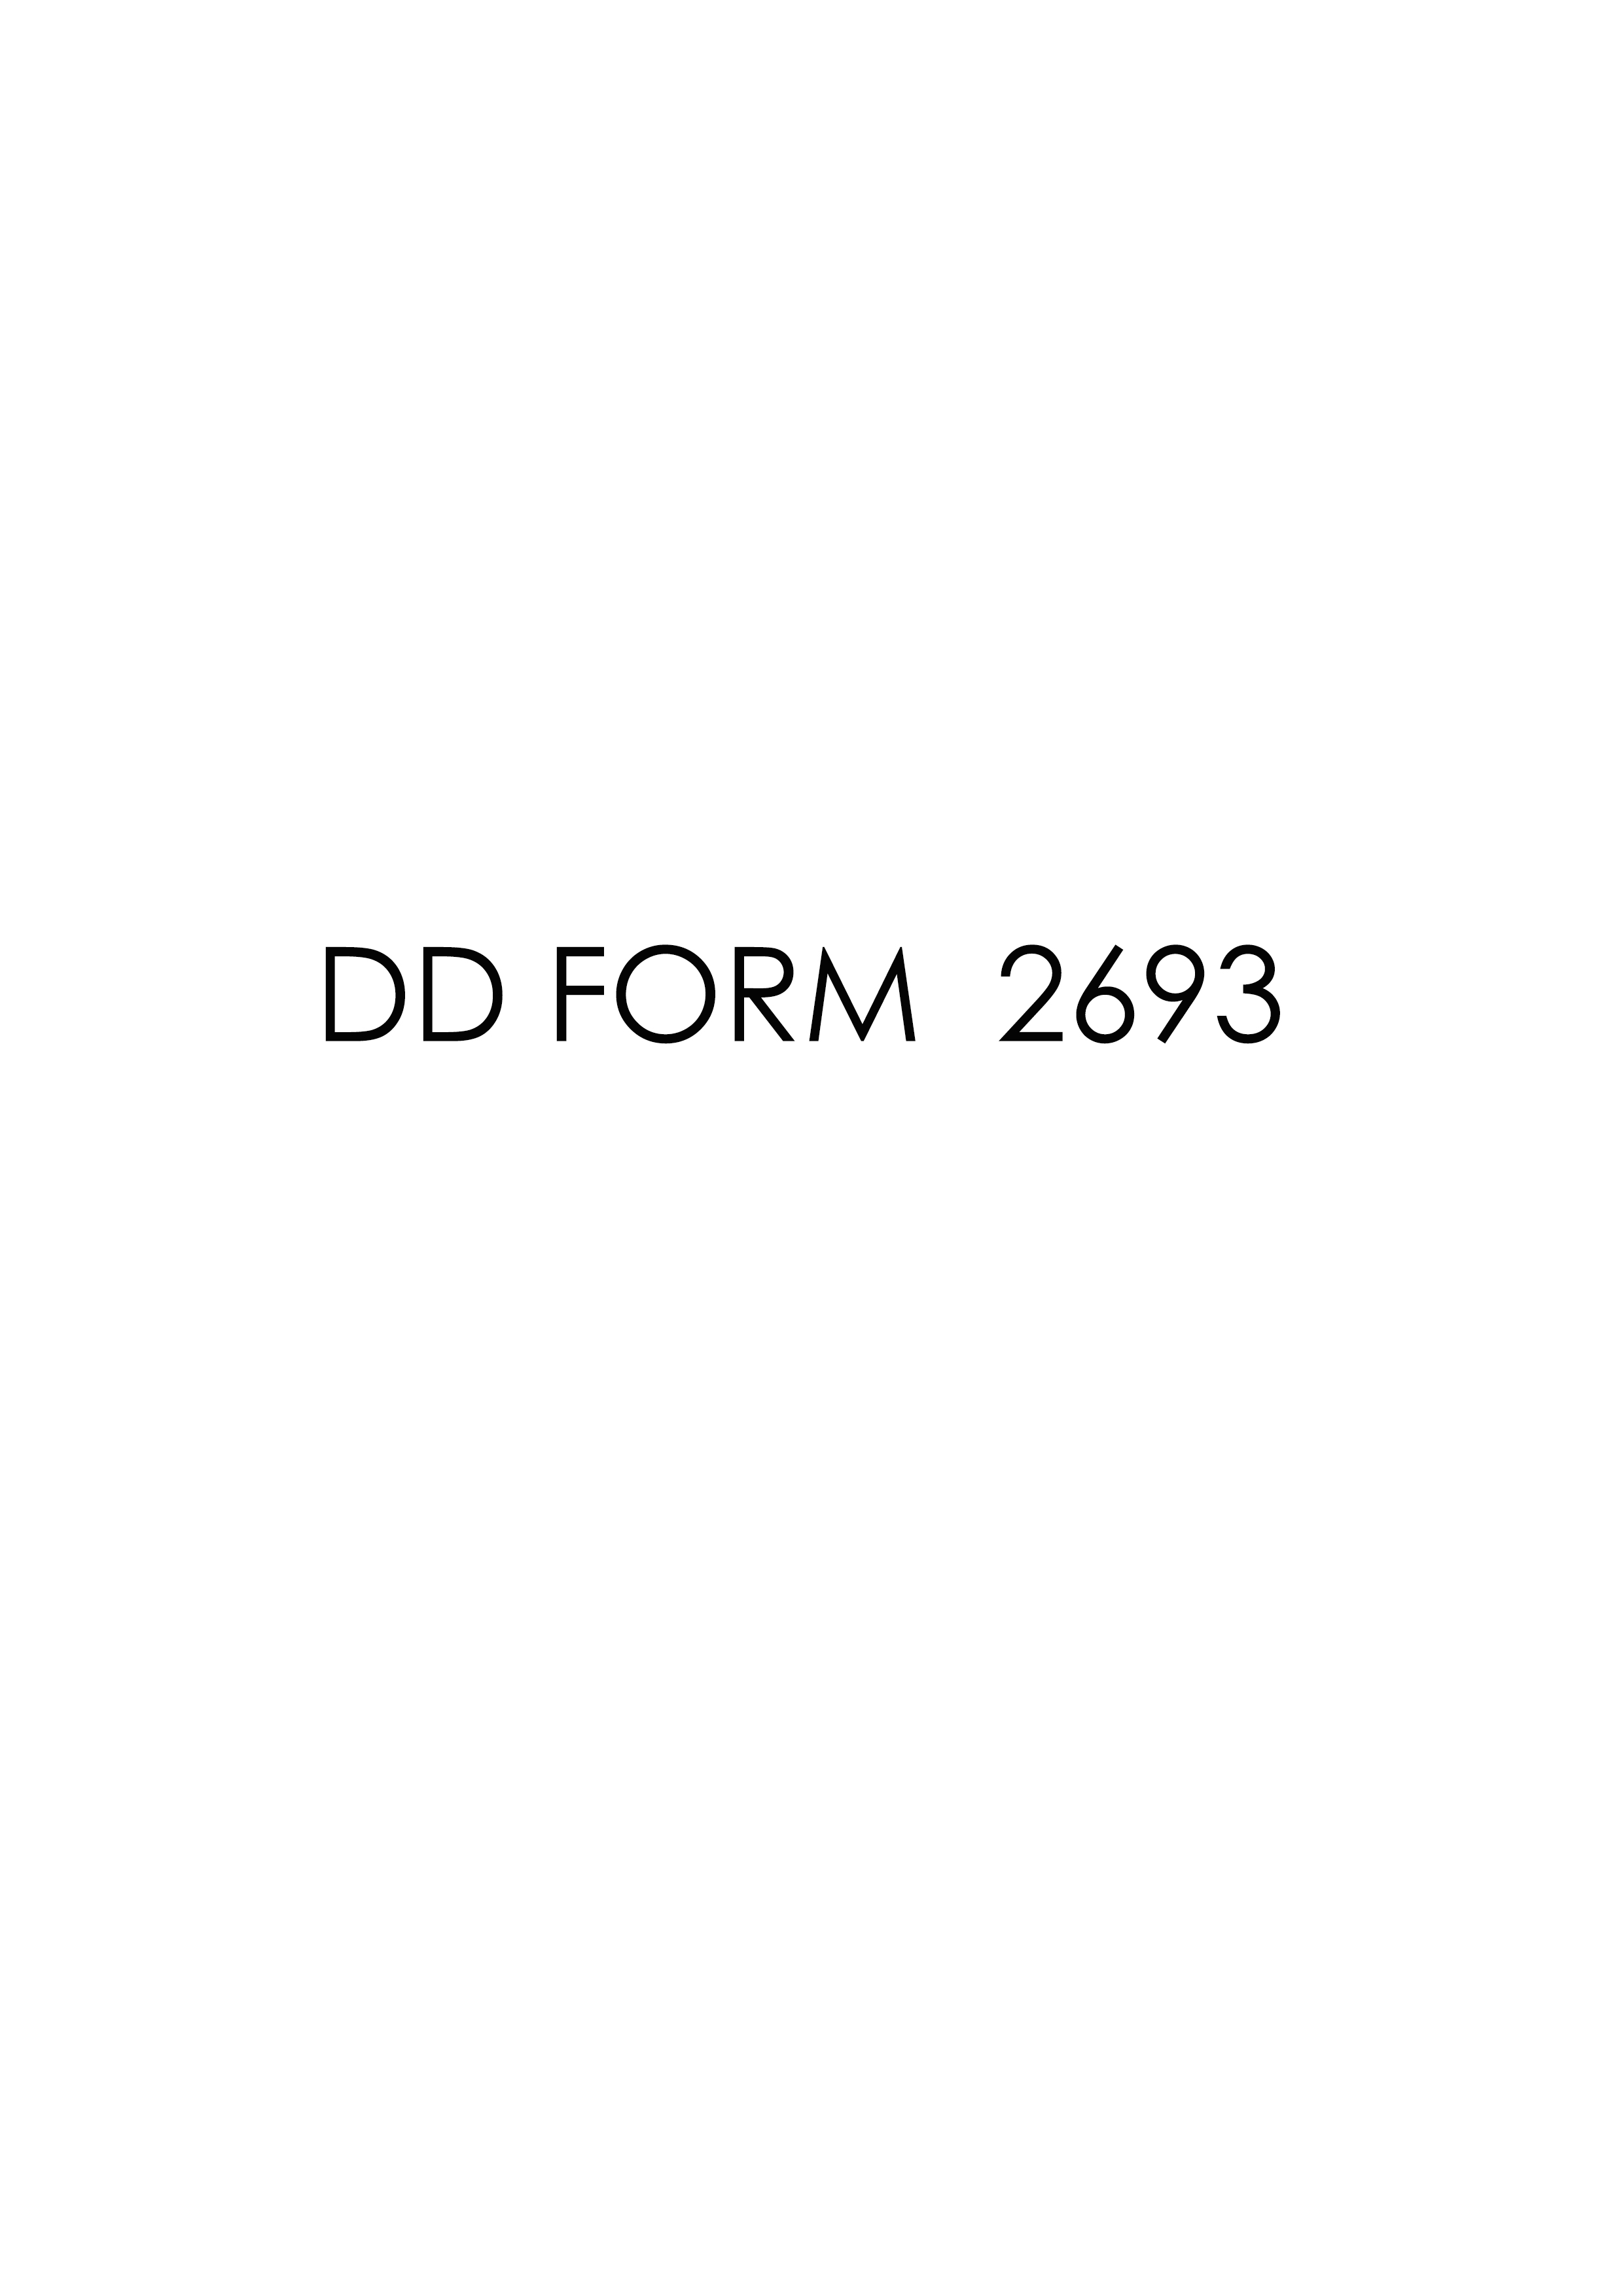 Download Fillable dd Form 2693